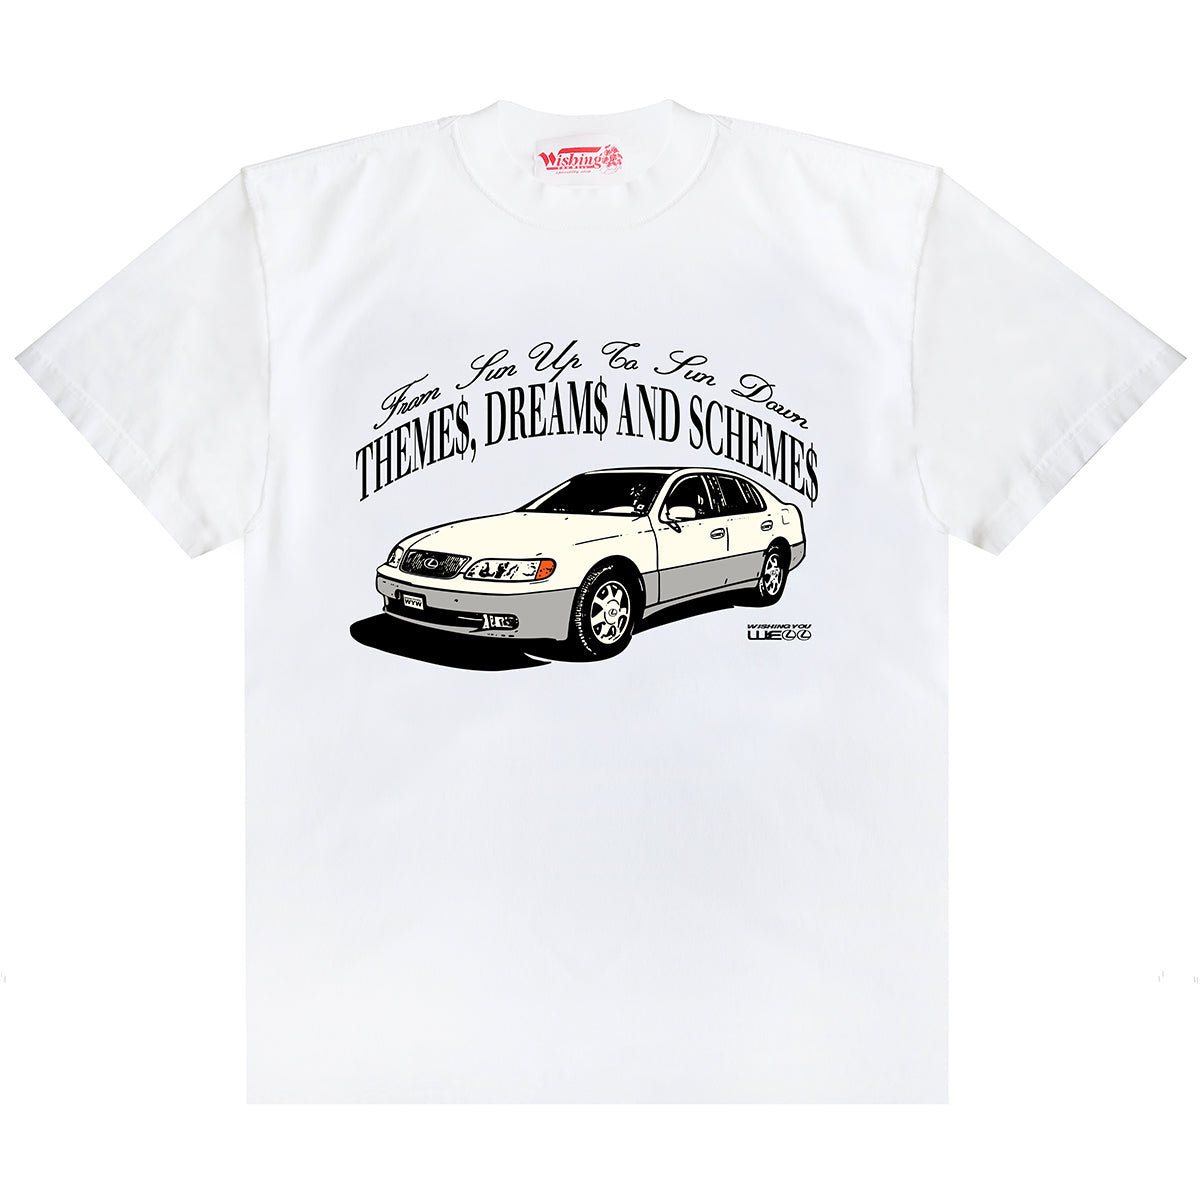 THEMES, DREAMS AND SCHEMES (93' LEXUS GS 300 REVERSE TEE/WHITE GD)